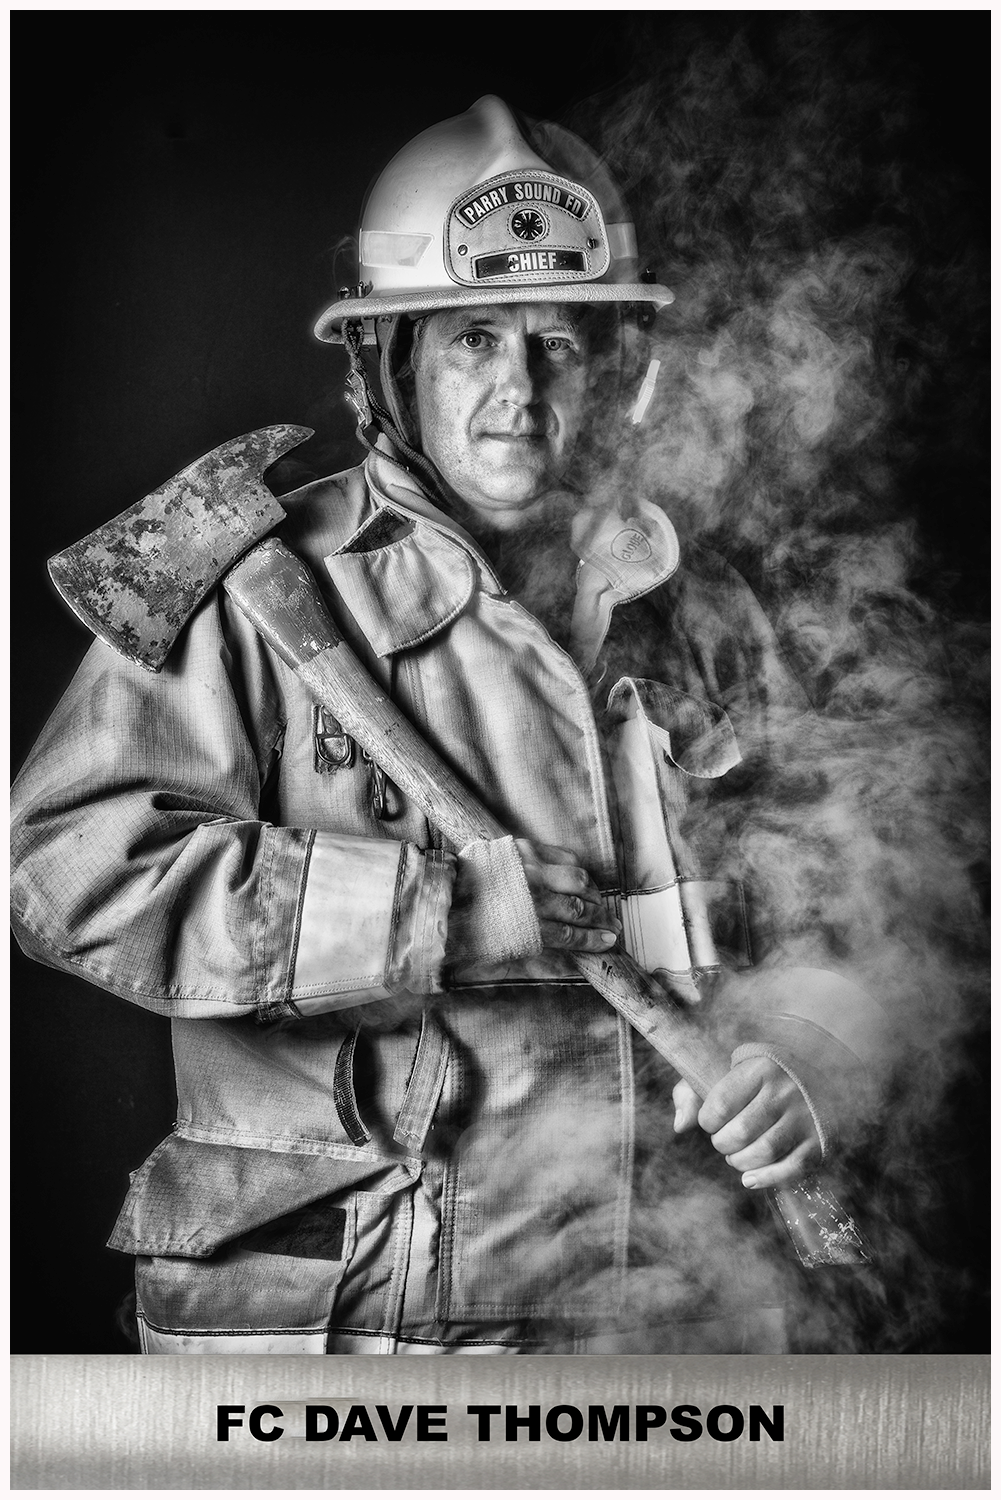 Fire Chief Dave Thompson